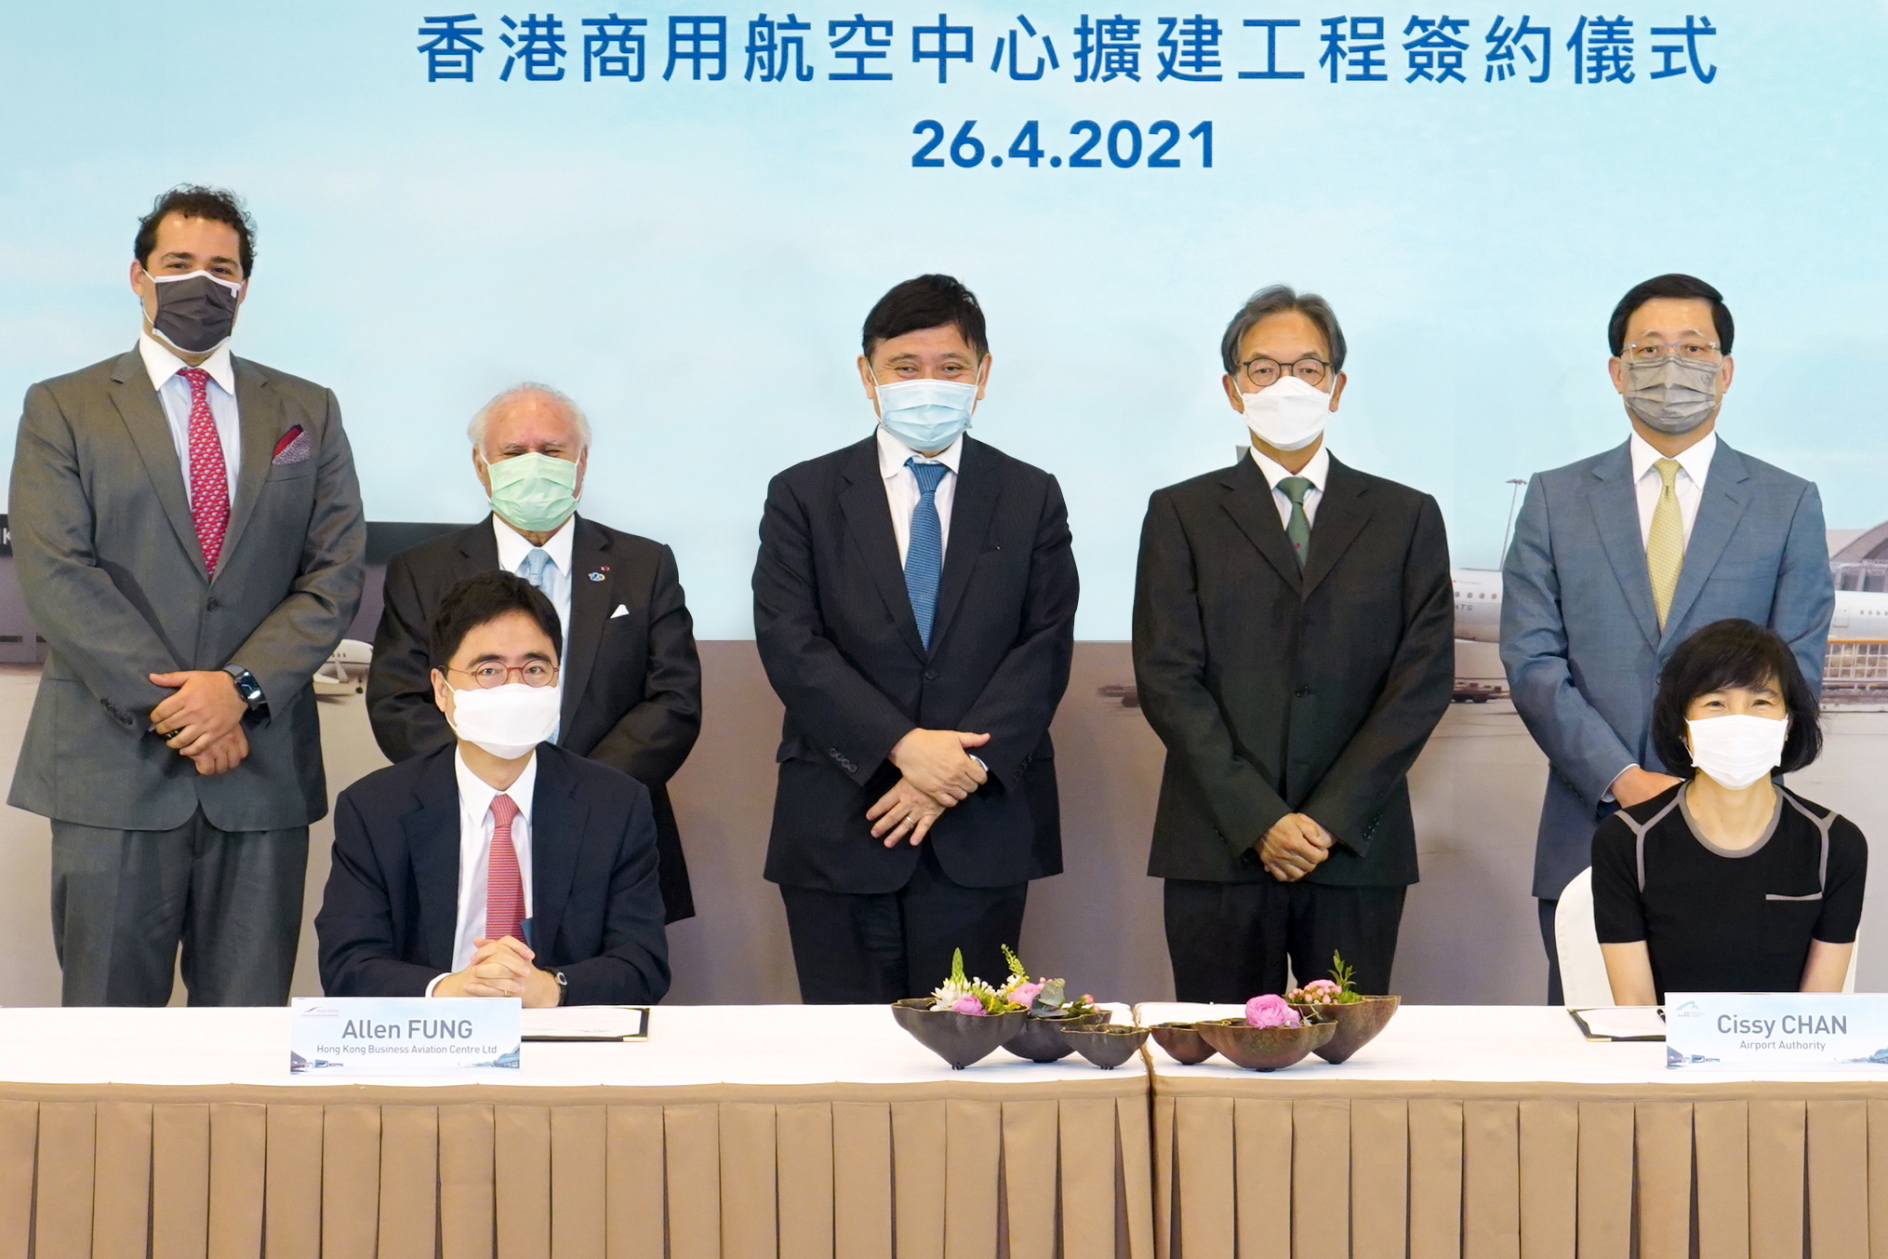 Jack So, Chairman of the Airport Authority Hong Kong (AA) (back row second right) and Fred Lam, Chief Executive Officer of the AA (back row first right), witness the signing of agreement on Hong Kong Business Aviation Centre (HKBAC) expansion project, together with the representatives of the key shareholders of HKBAC Ltd, Raymond Kwok, Chairman and Managing Director of Sun Hung Kai Properties Ltd (back row middle), Sir Michael Kadoorie, Director of HKBAC Ltd (back row second left) and Philip Kadoorie (back row first left). Click to enlarge.